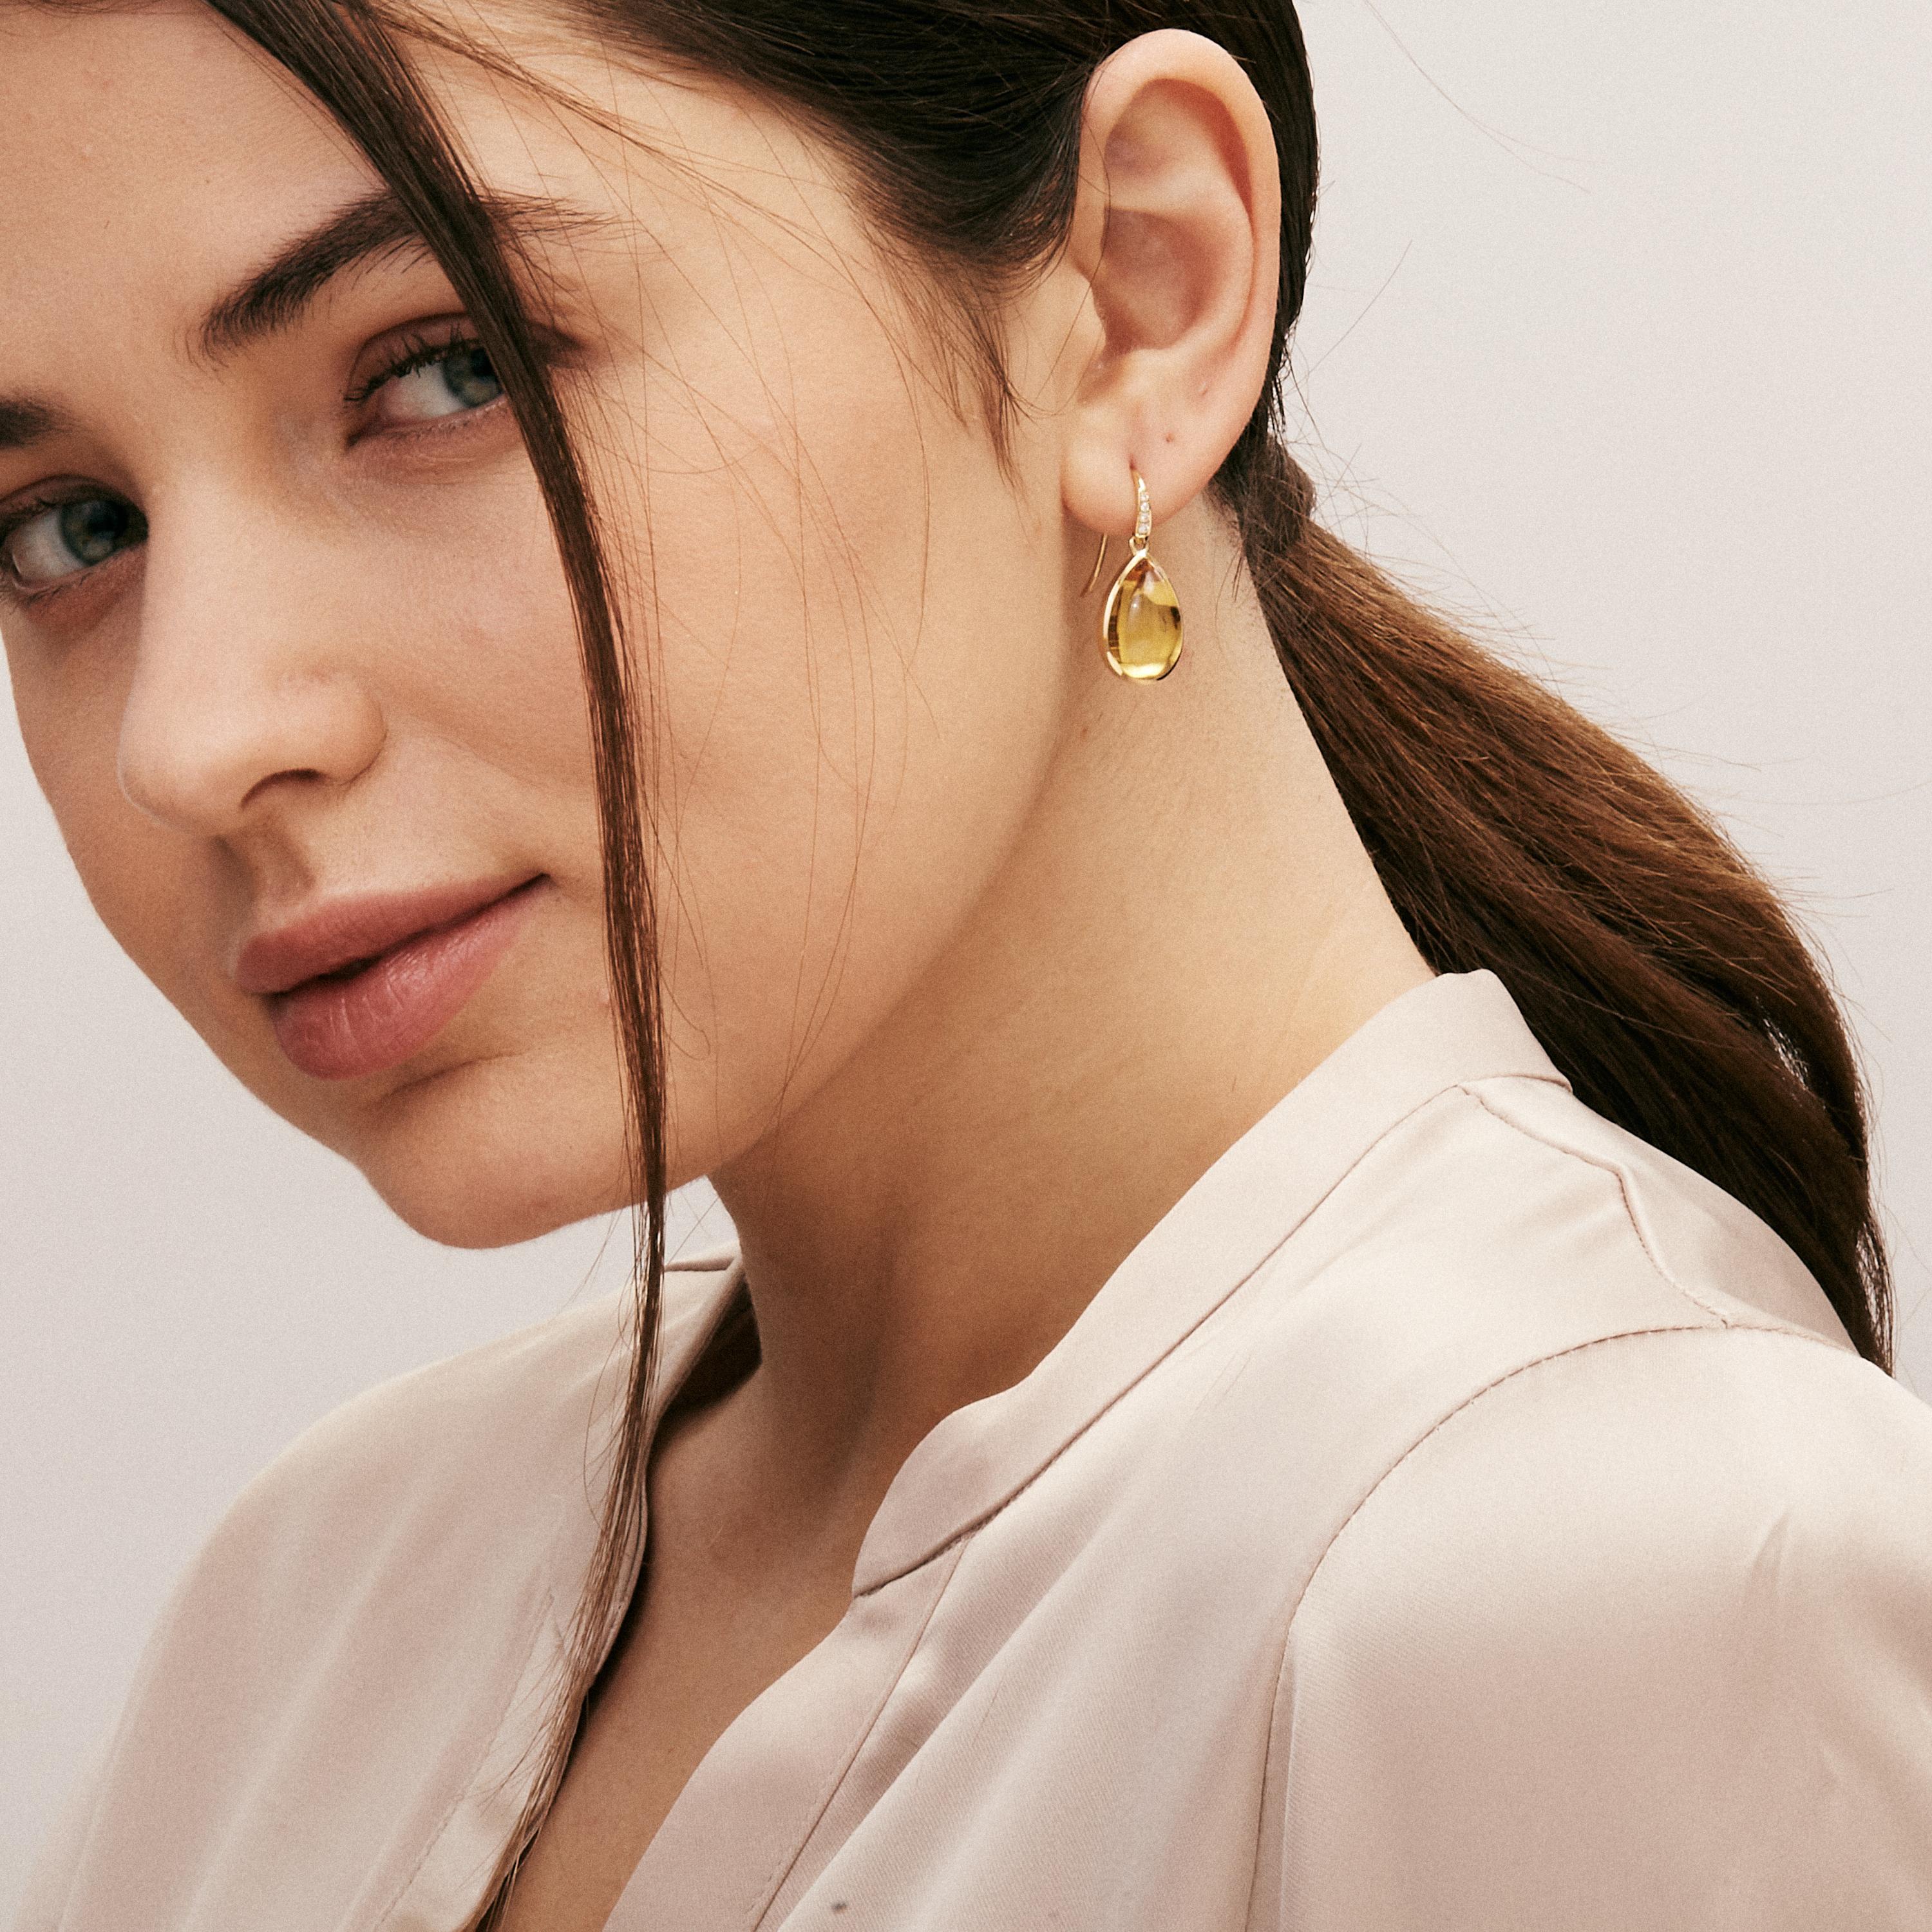 Created in 18 karat yellow gold
Citrine 11.50 carats approx.
Diamonds 0.05 carat approx.
Limited edition

Crafted from 18 karat yellow gold, these exclusive earrings feature shimmering moon quartz that total 11.50 carats, and delicate diamonds